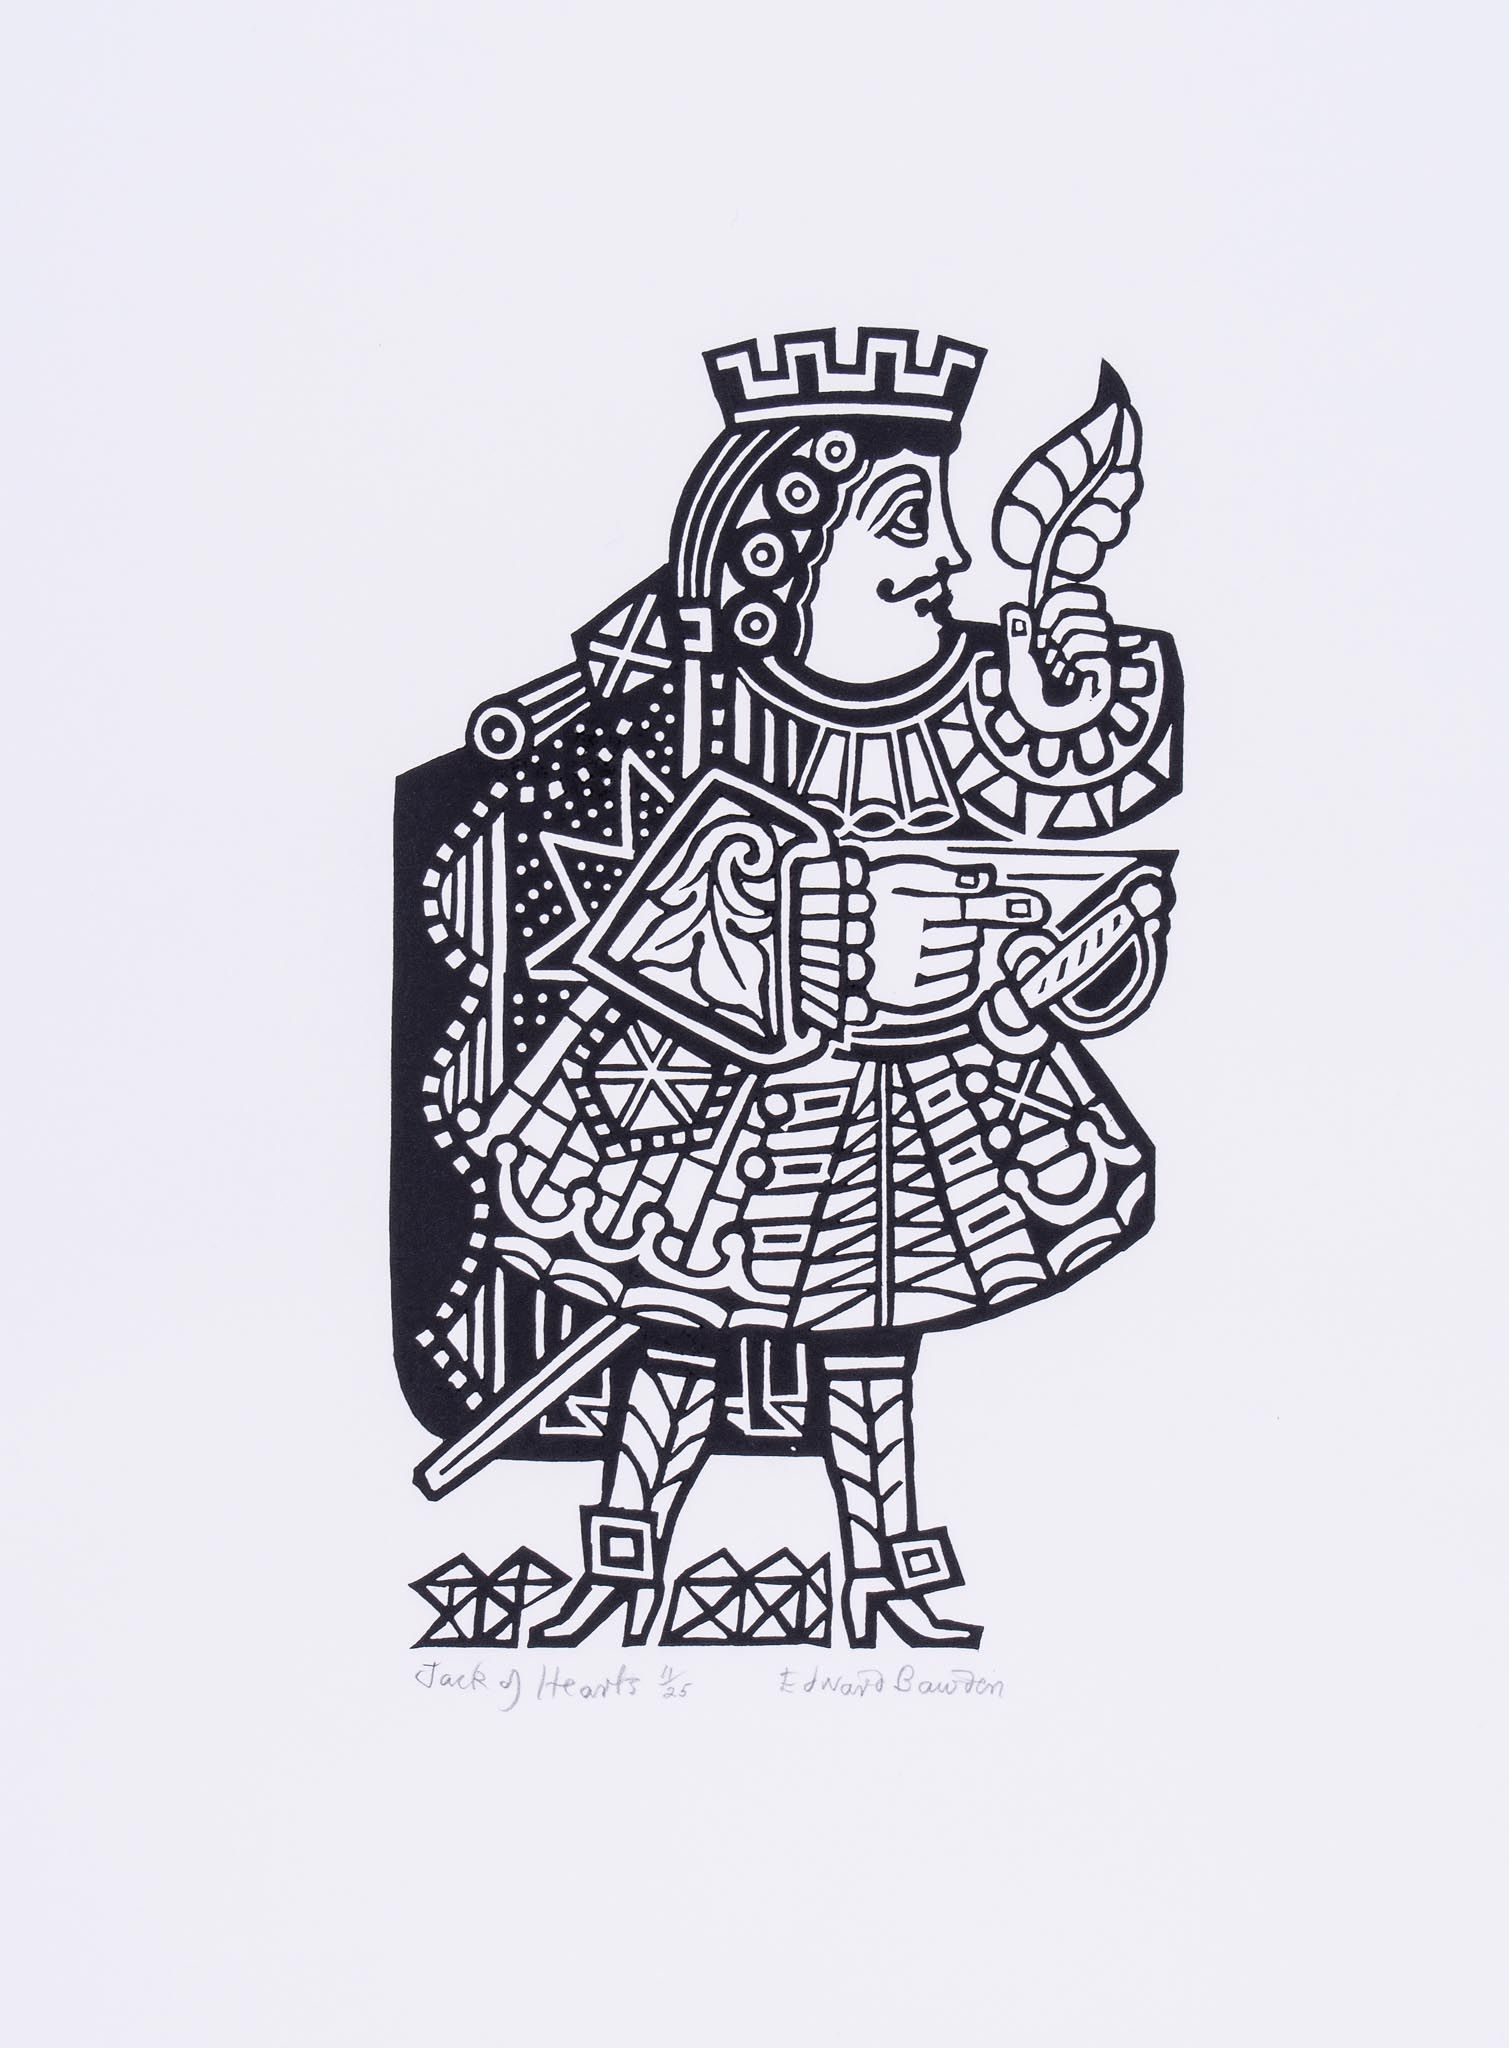 Edward Bawden (1903-1989) - The King of Hearts; The Jack of Hearts two linocuts, each signed and